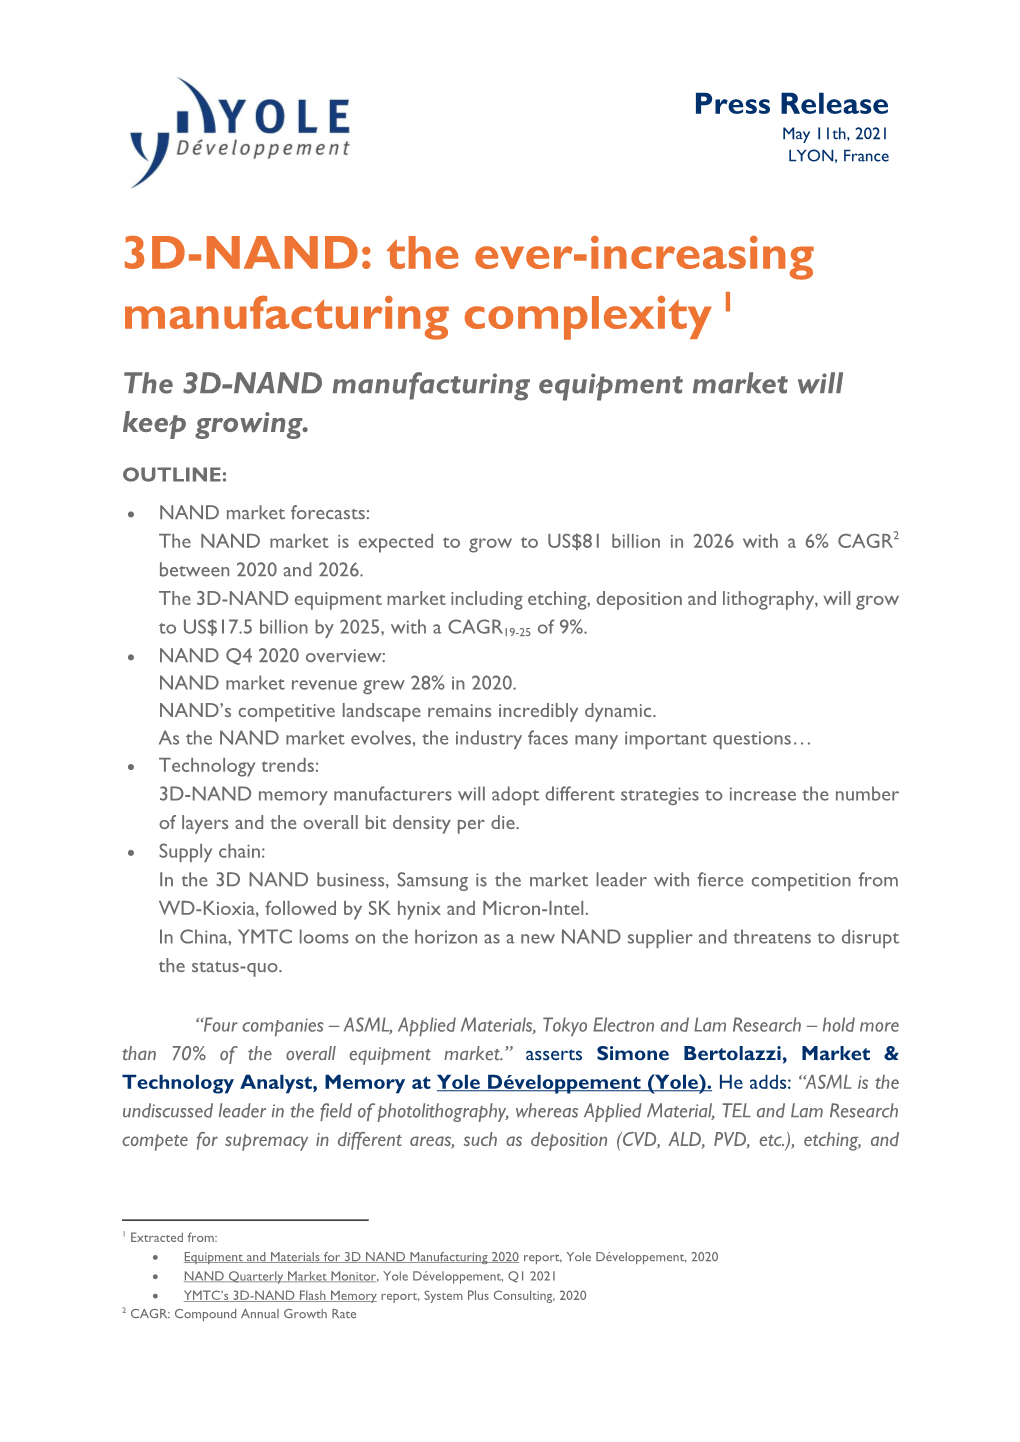 3D-NAND: the Ever-Increasing Manufacturing Complexity 1 the 3D-NAND Manufacturing Equipment Market Will Keep Growing